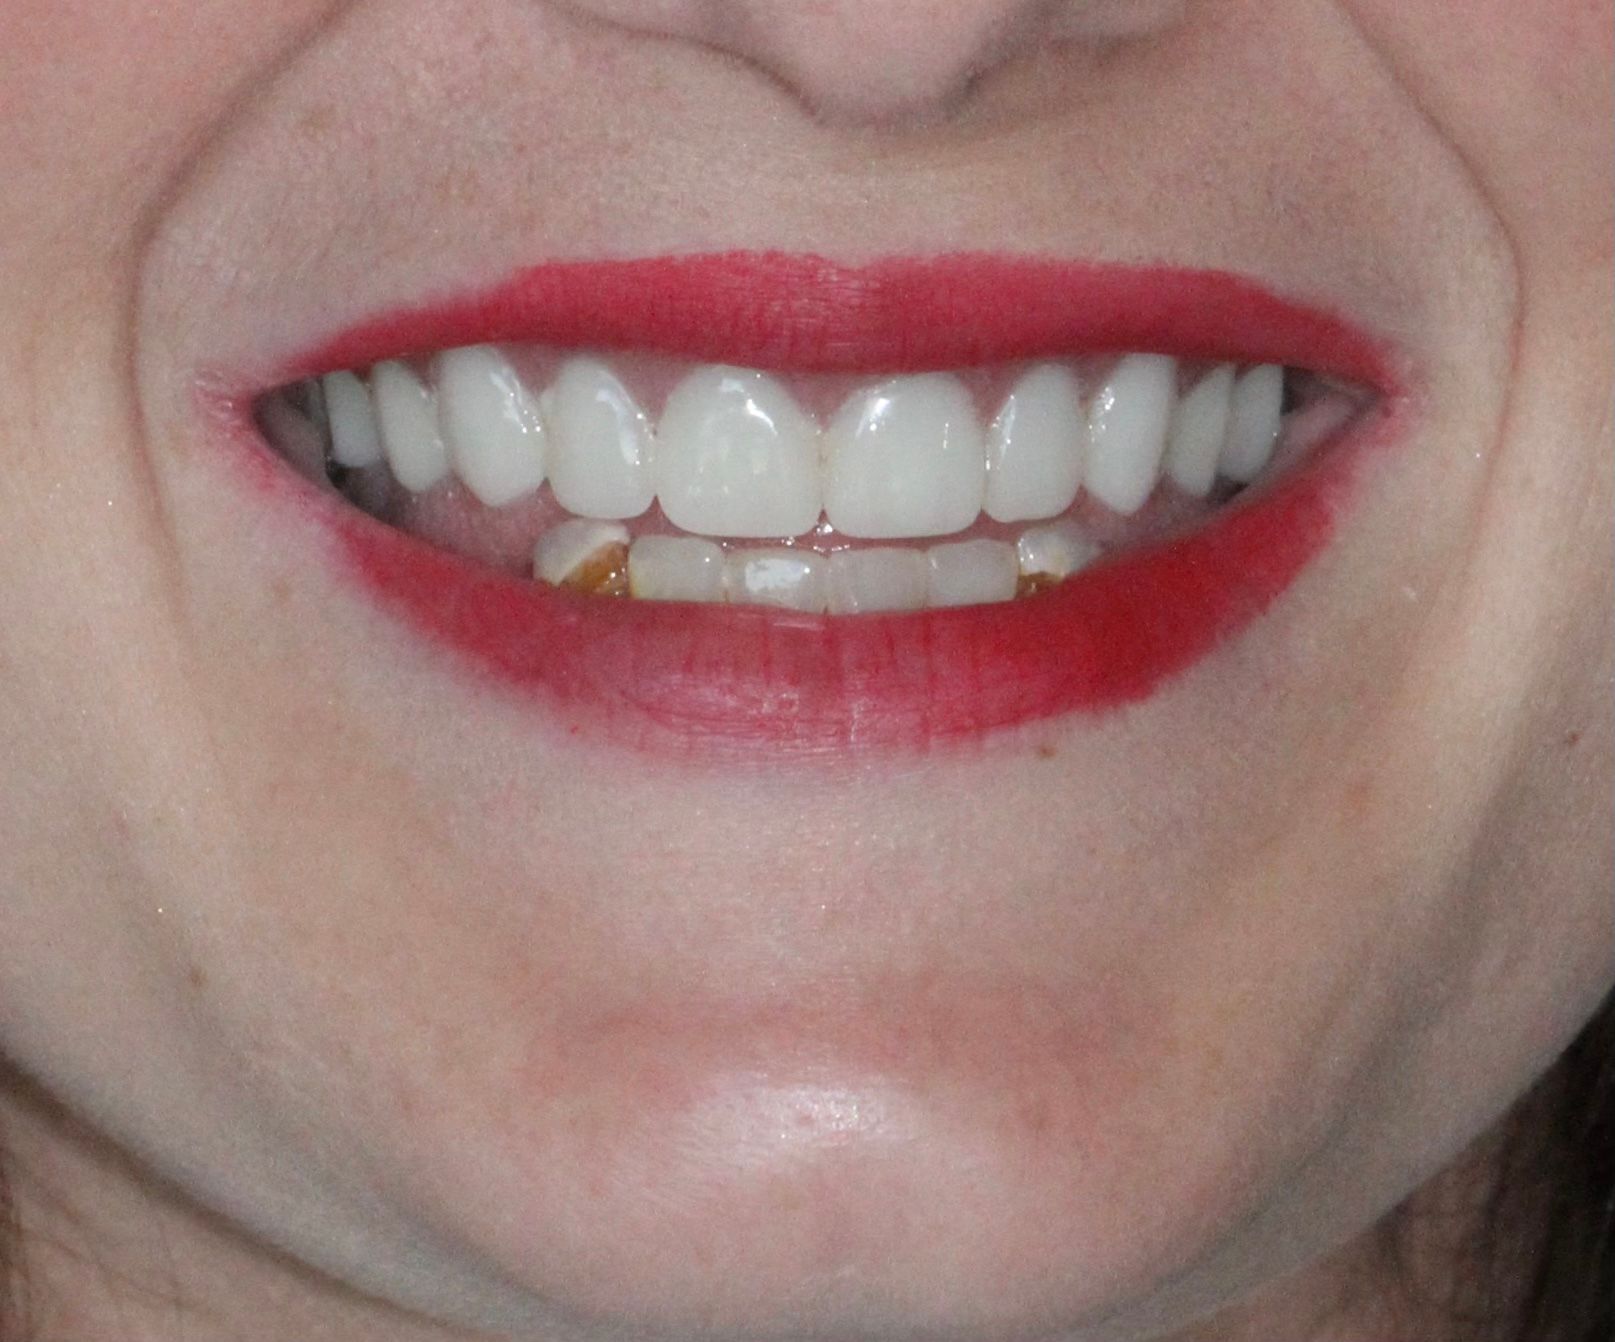 A close up of a woman 's mouth with white teeth and red lipstick